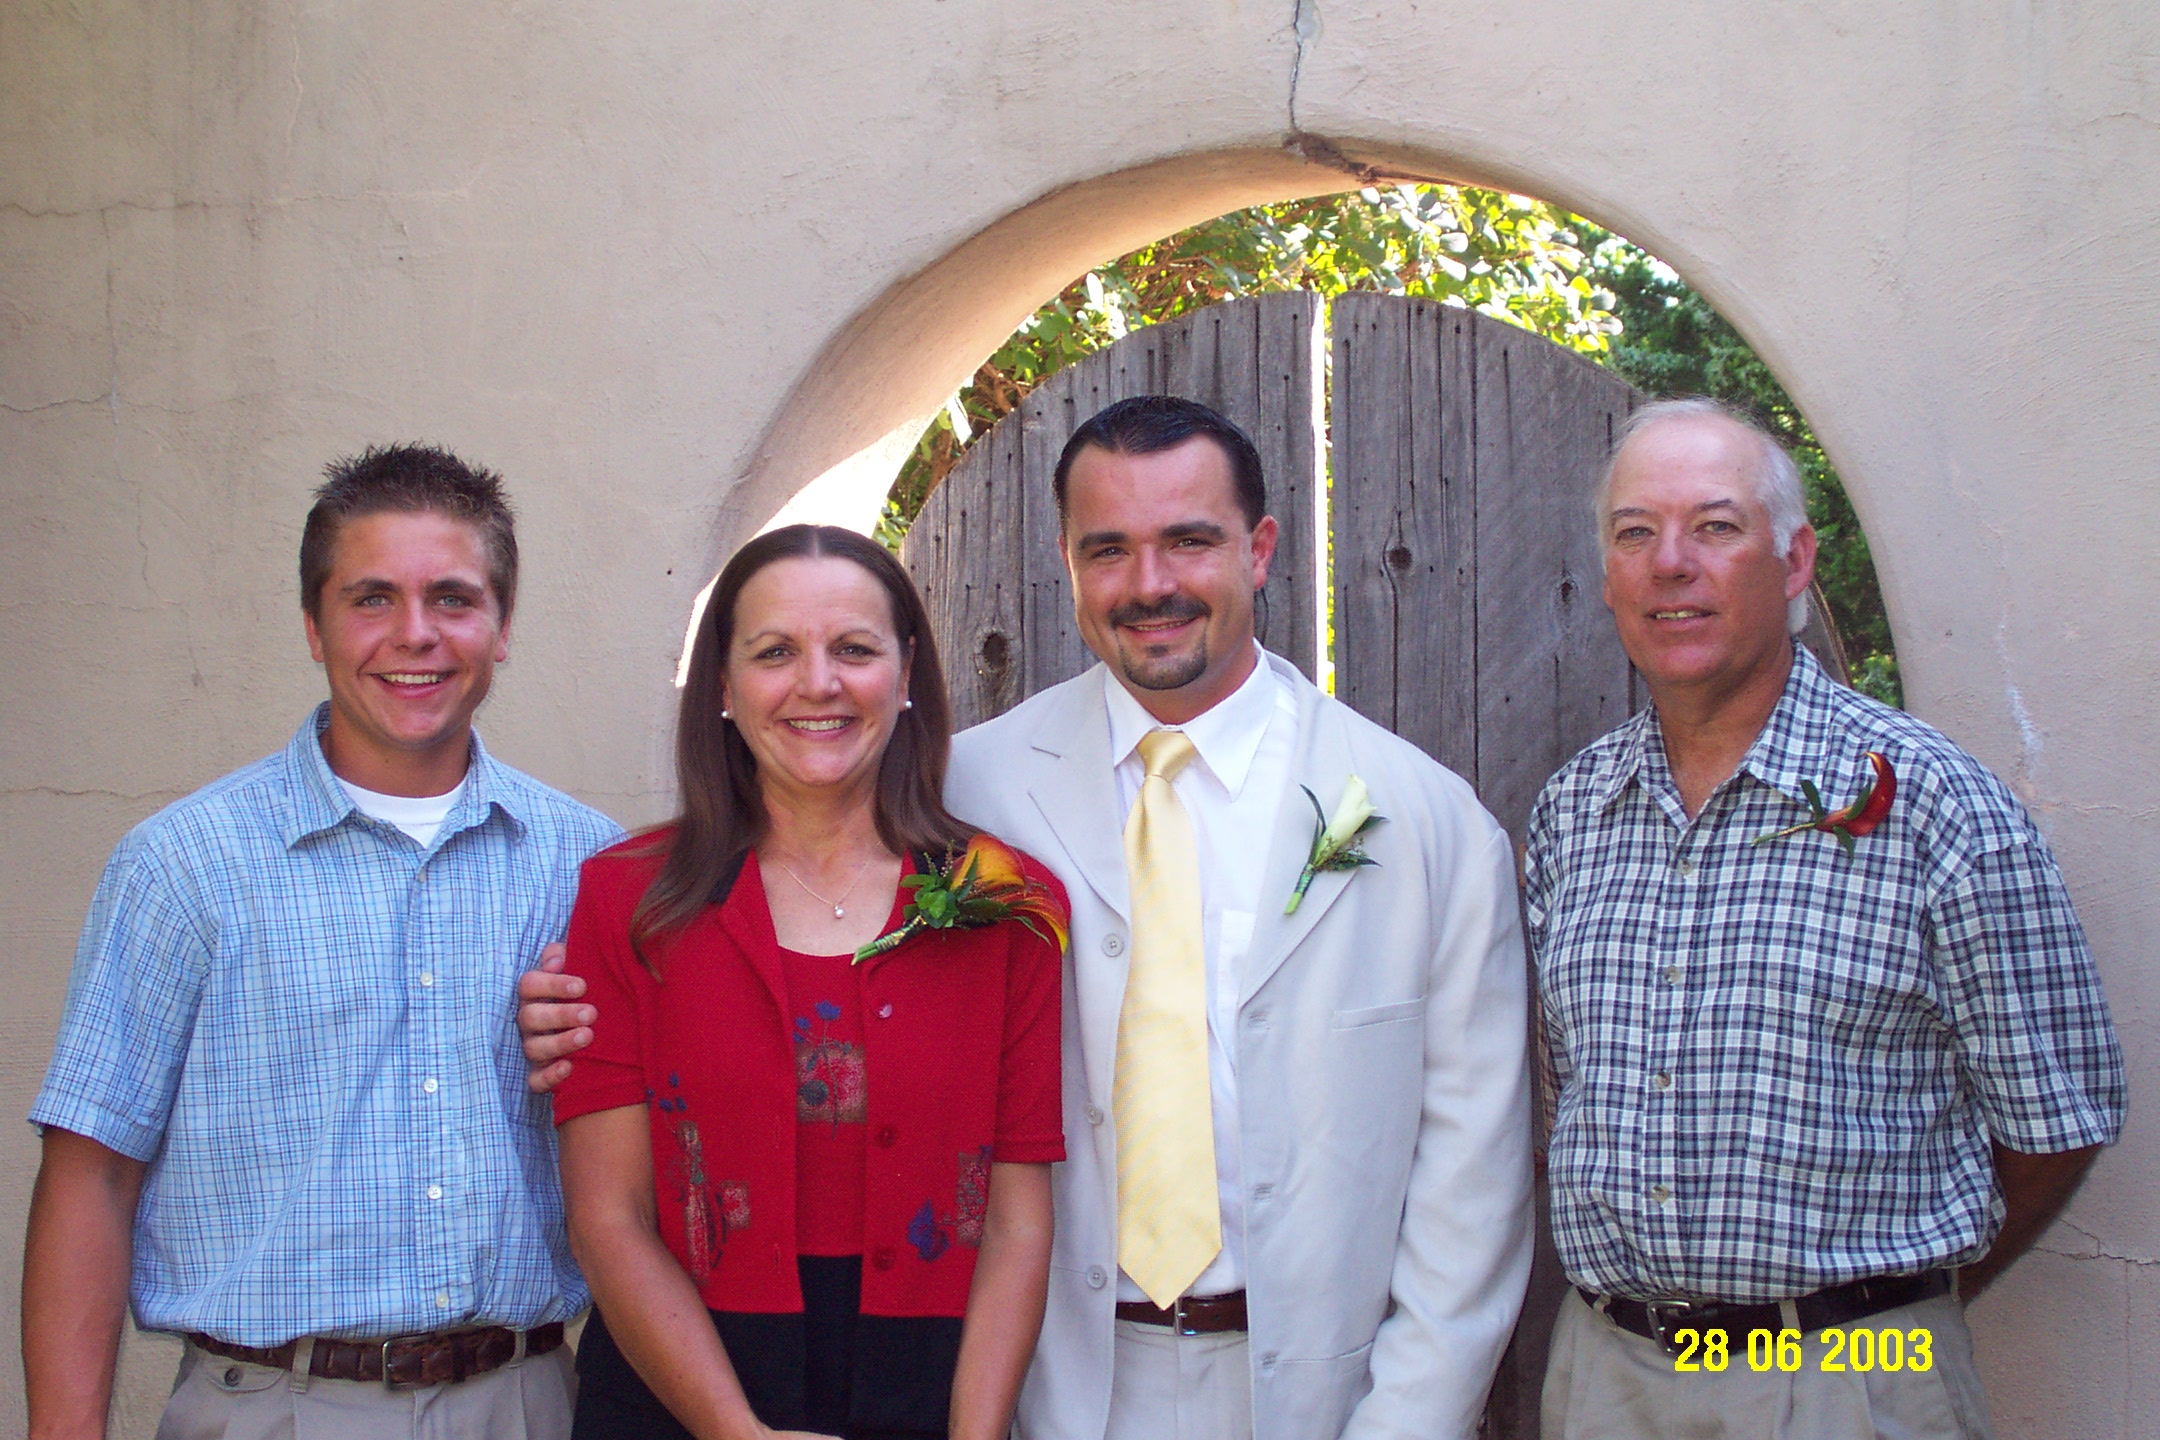 Brad with his brother Scott, his mother Donna and her husband Ron